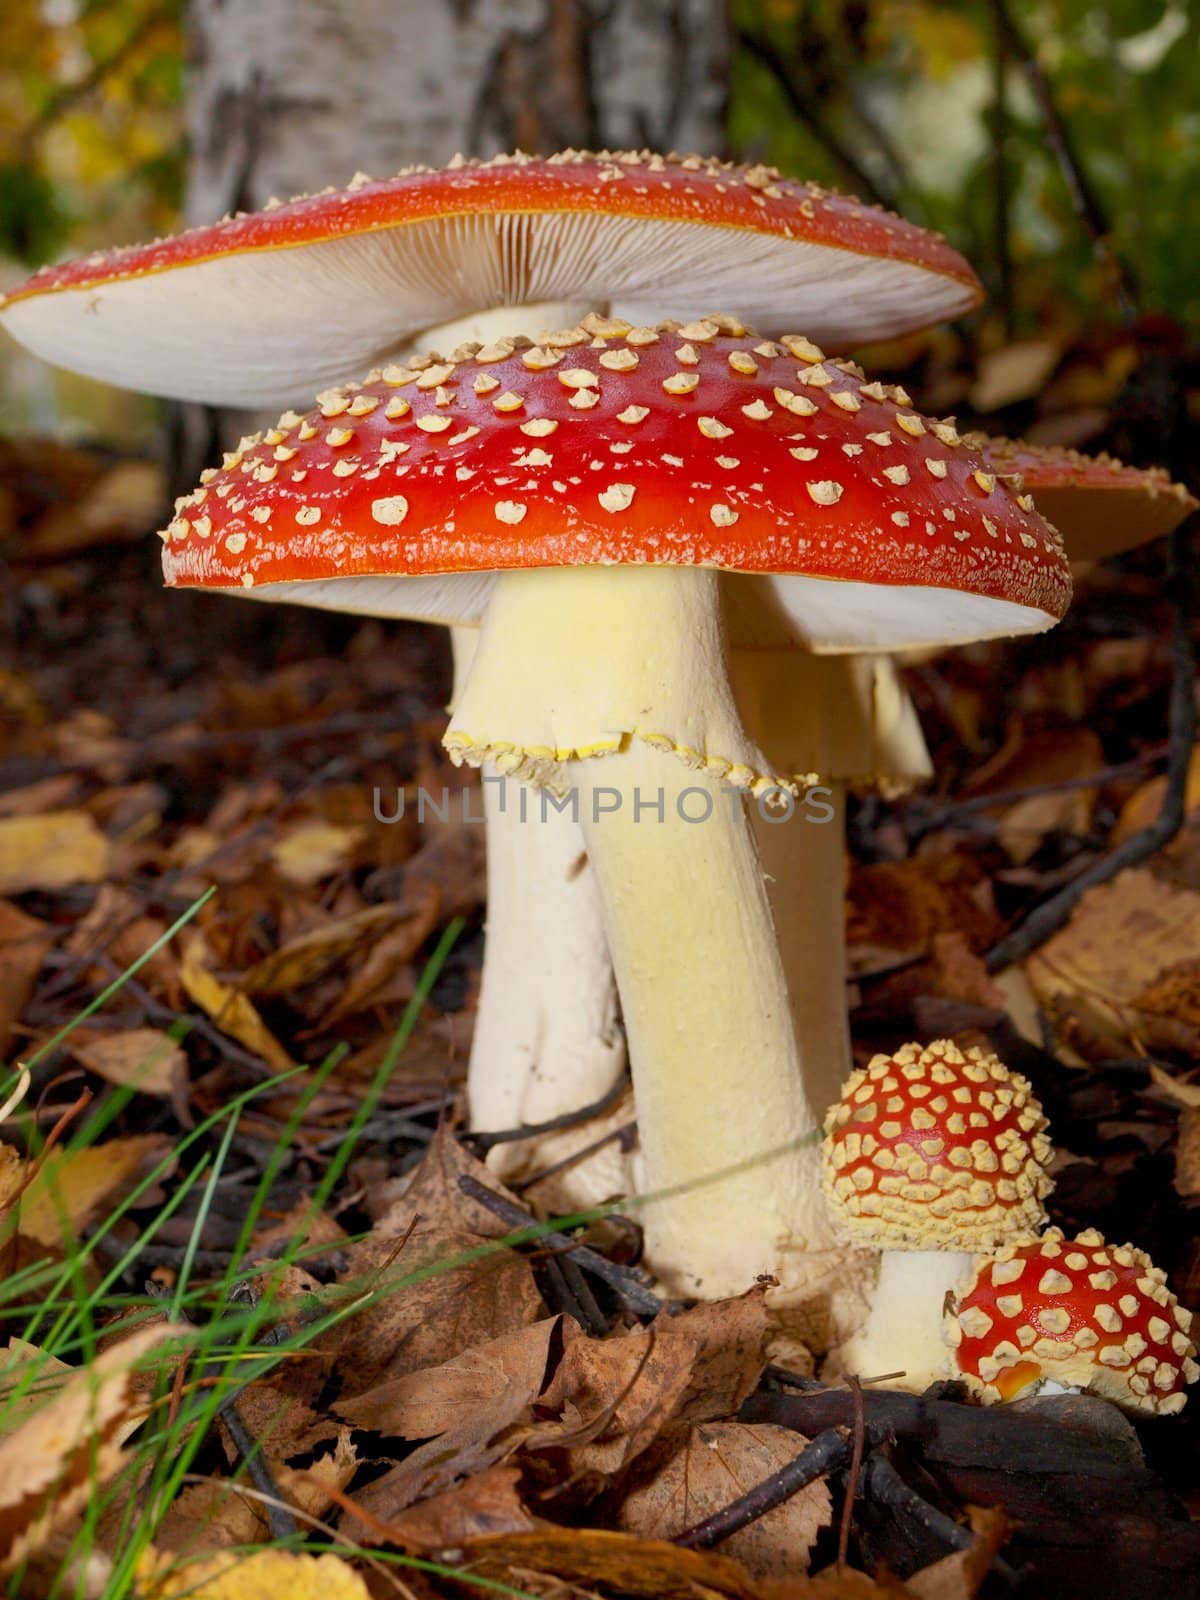  Toadstool mushroom, isolated, closeup in the grass